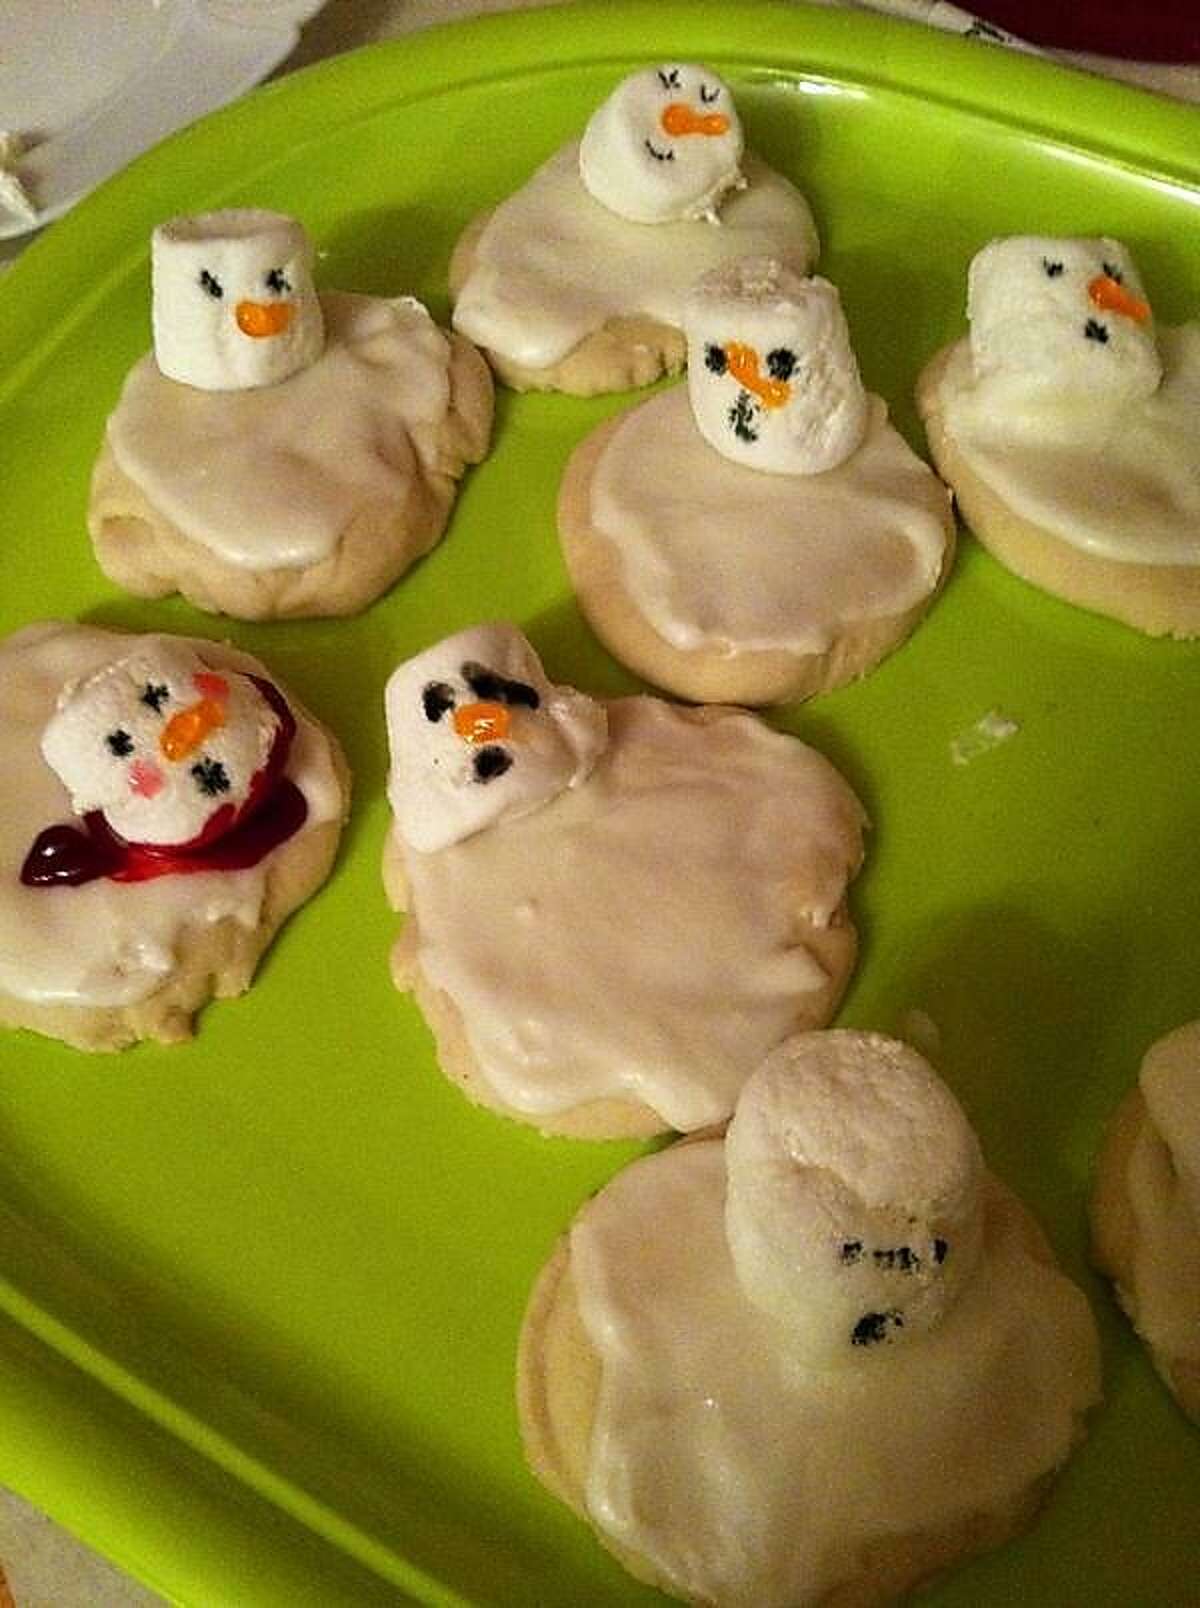 Unintentionally spooky snowmen cookies have little chance of providing any holiday cheer. Click here to see the original.